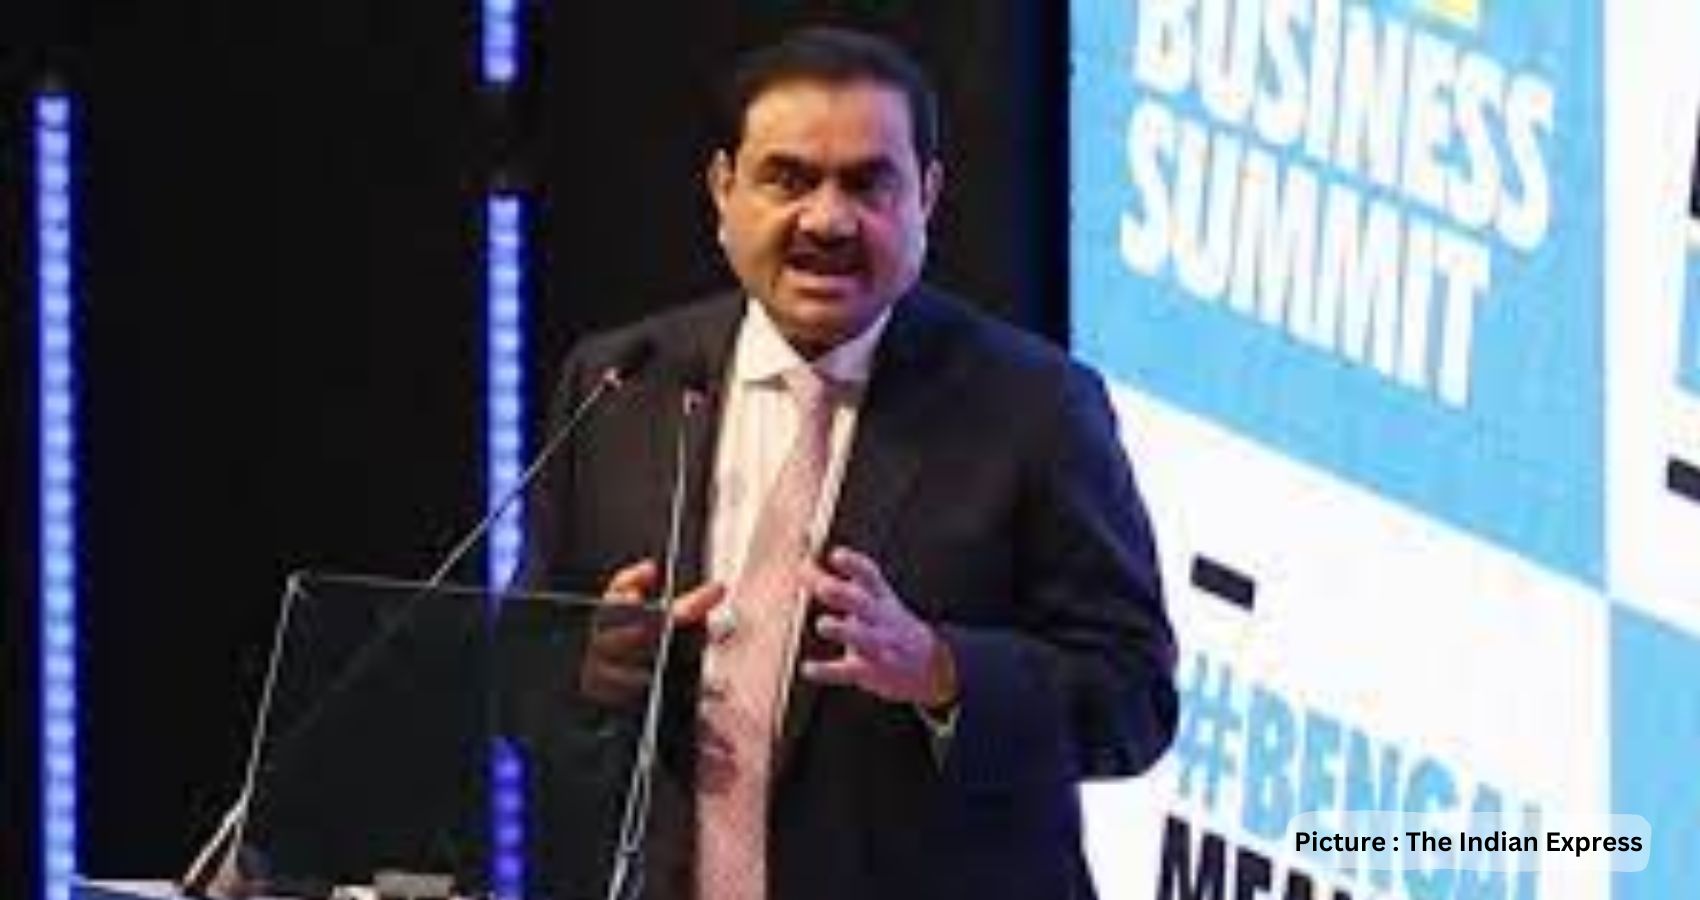 Stocks Tumbles 20% After US Research Group Accuses Adani Group Of Stock Manipulation